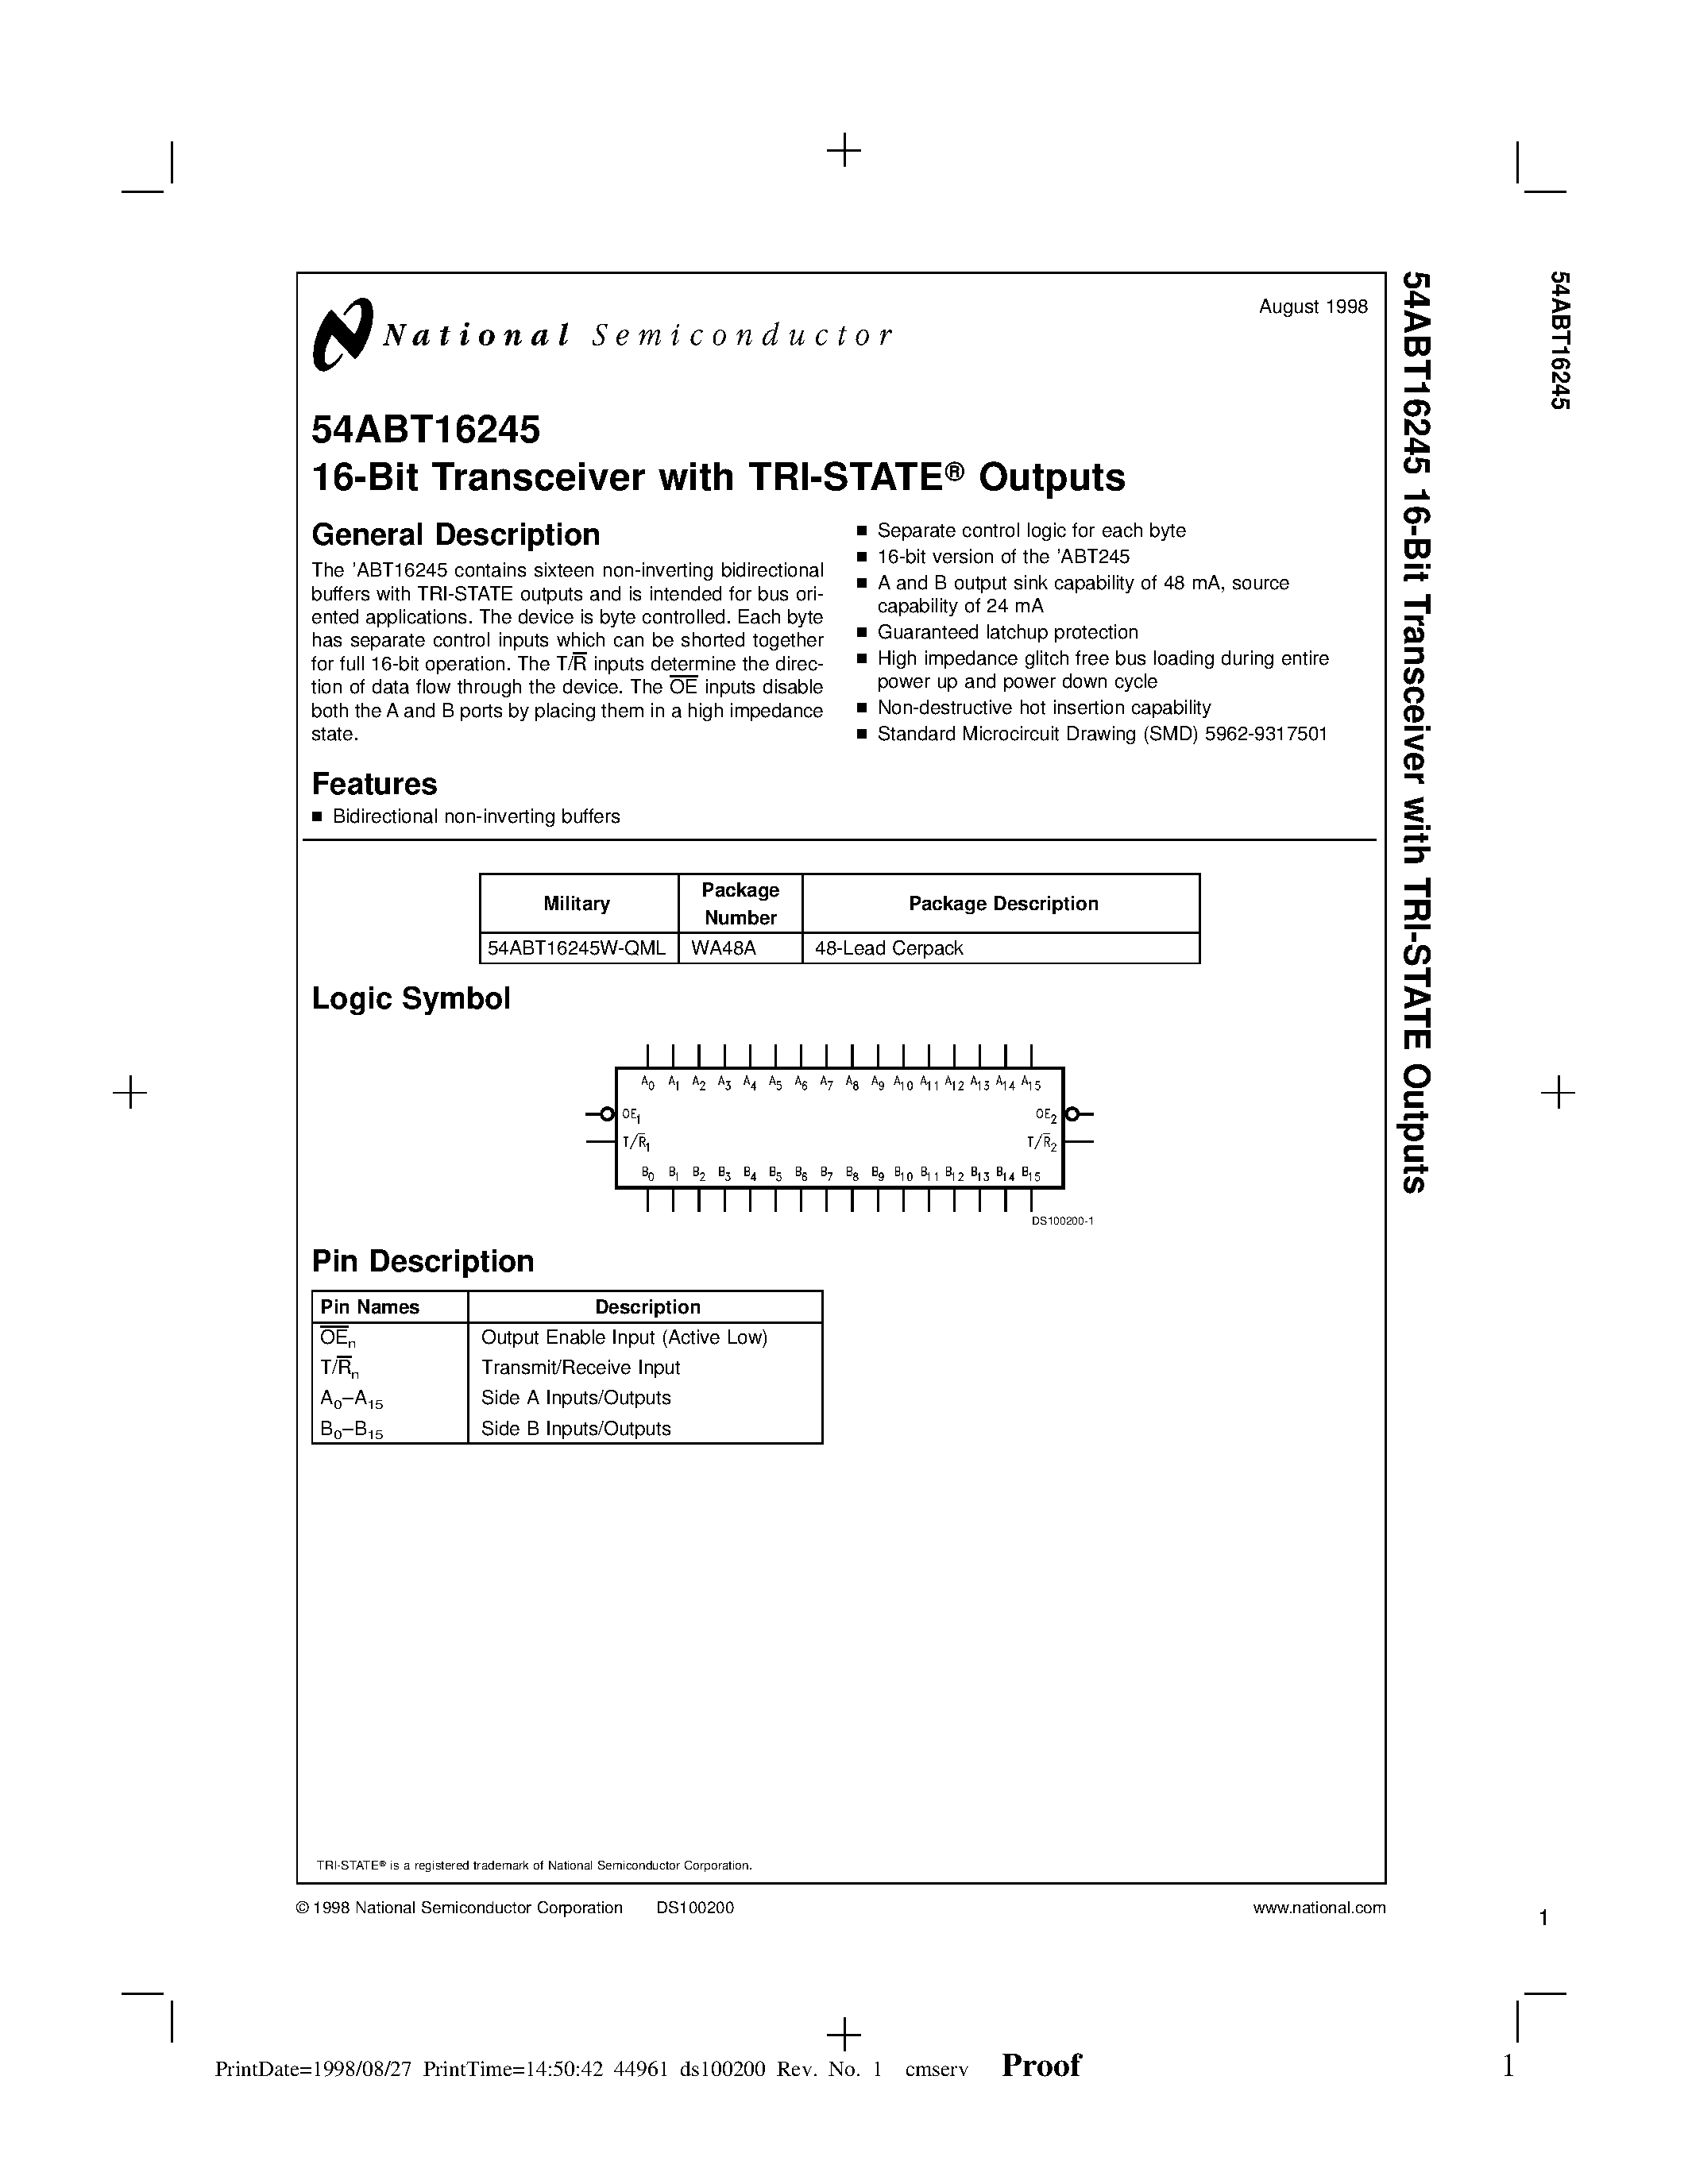 Datasheet 54ABT16245W-QML - 16-Bit Transceiver with TRI-STATE Outputs page 1